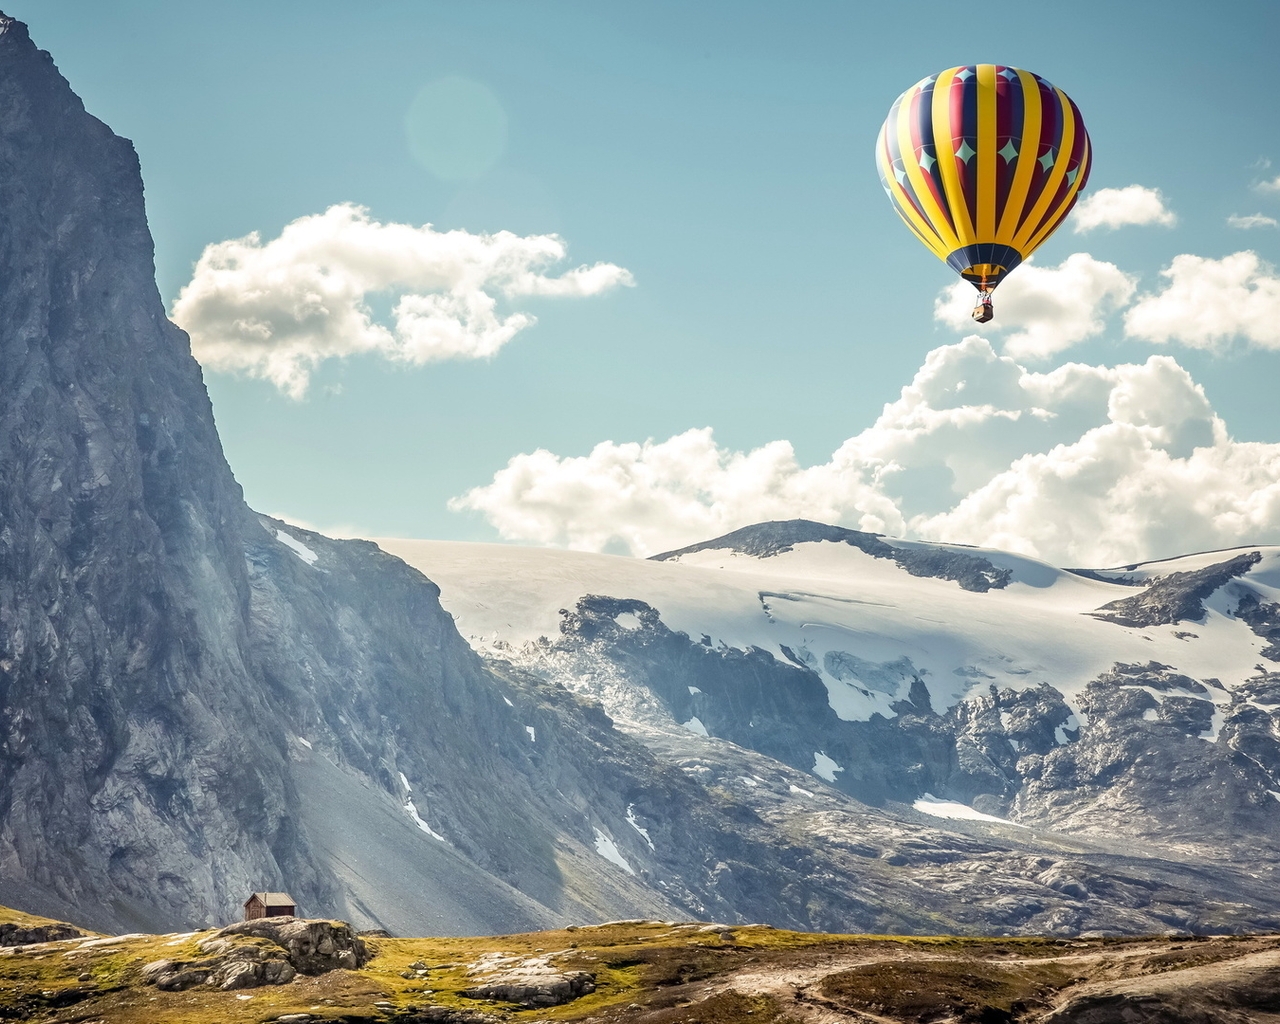 Image: Mountains, air, balloon, sky, clouds, height